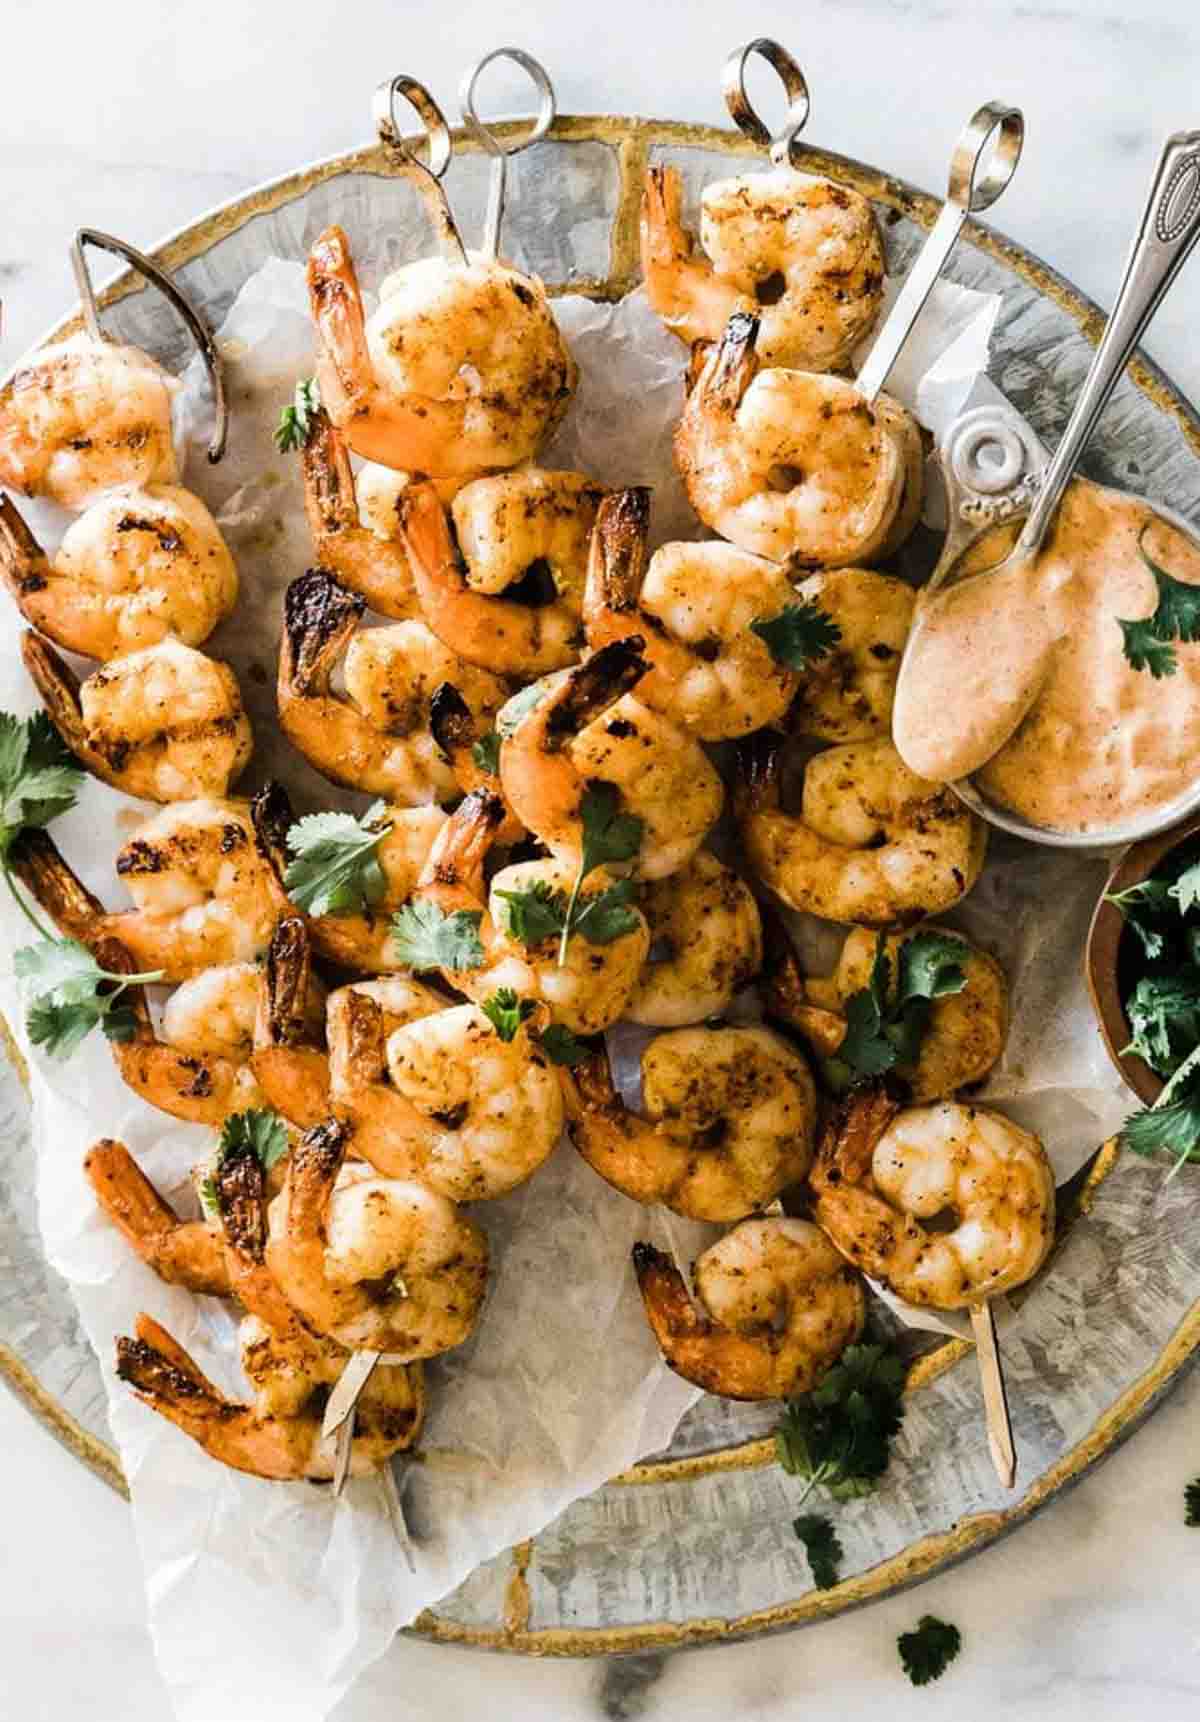 Shrimp on the barbie on a silver platter, garnished with cilantro.